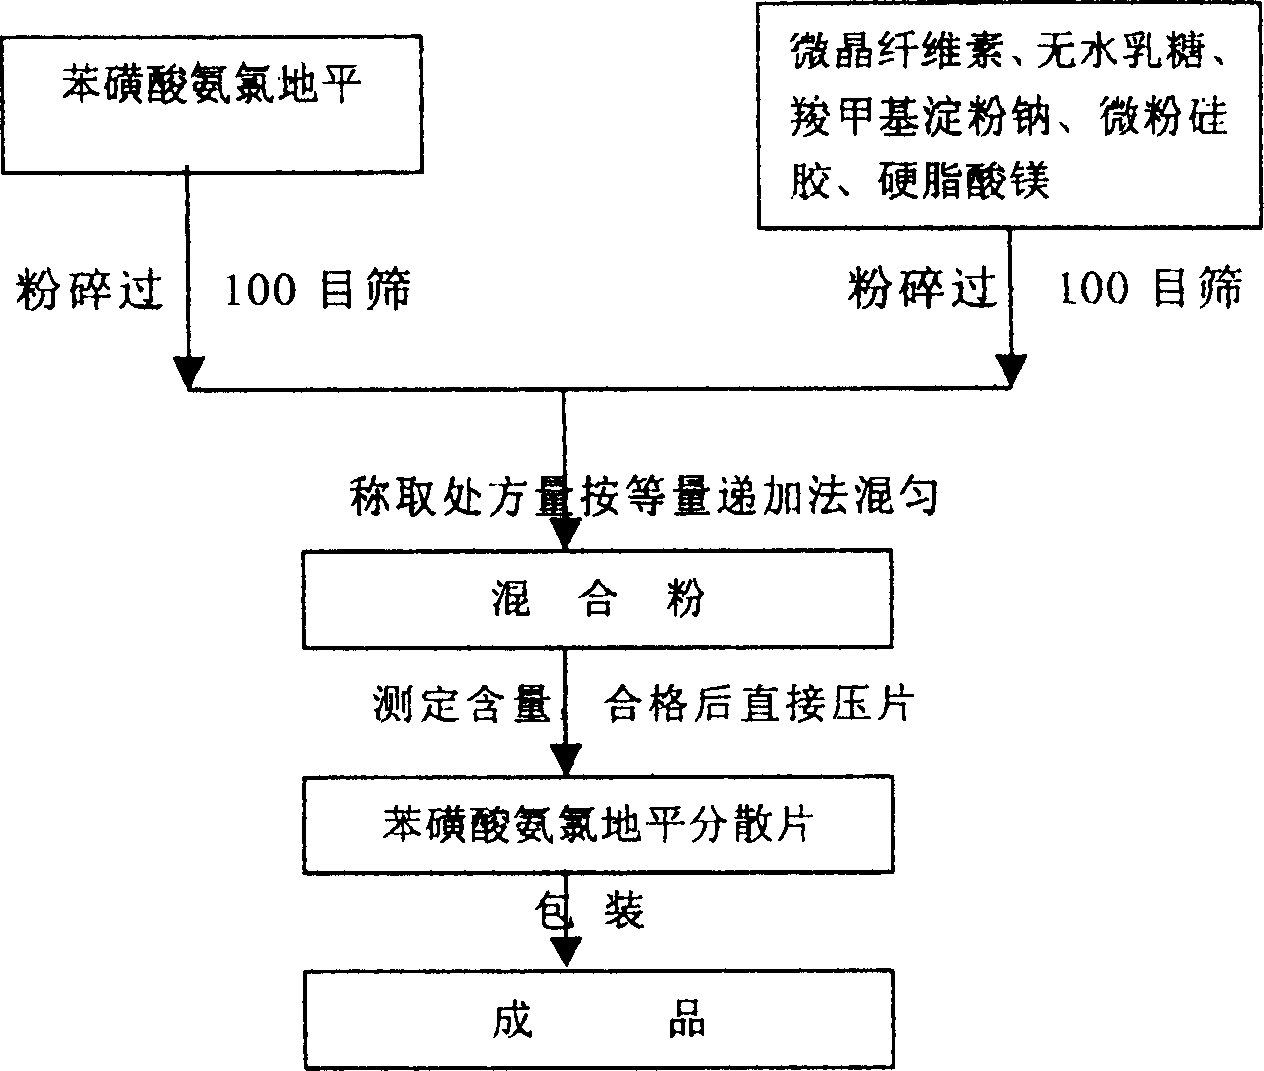 Phenylsulfonic acid amido chloro diping dispersion tablet and its preparation method